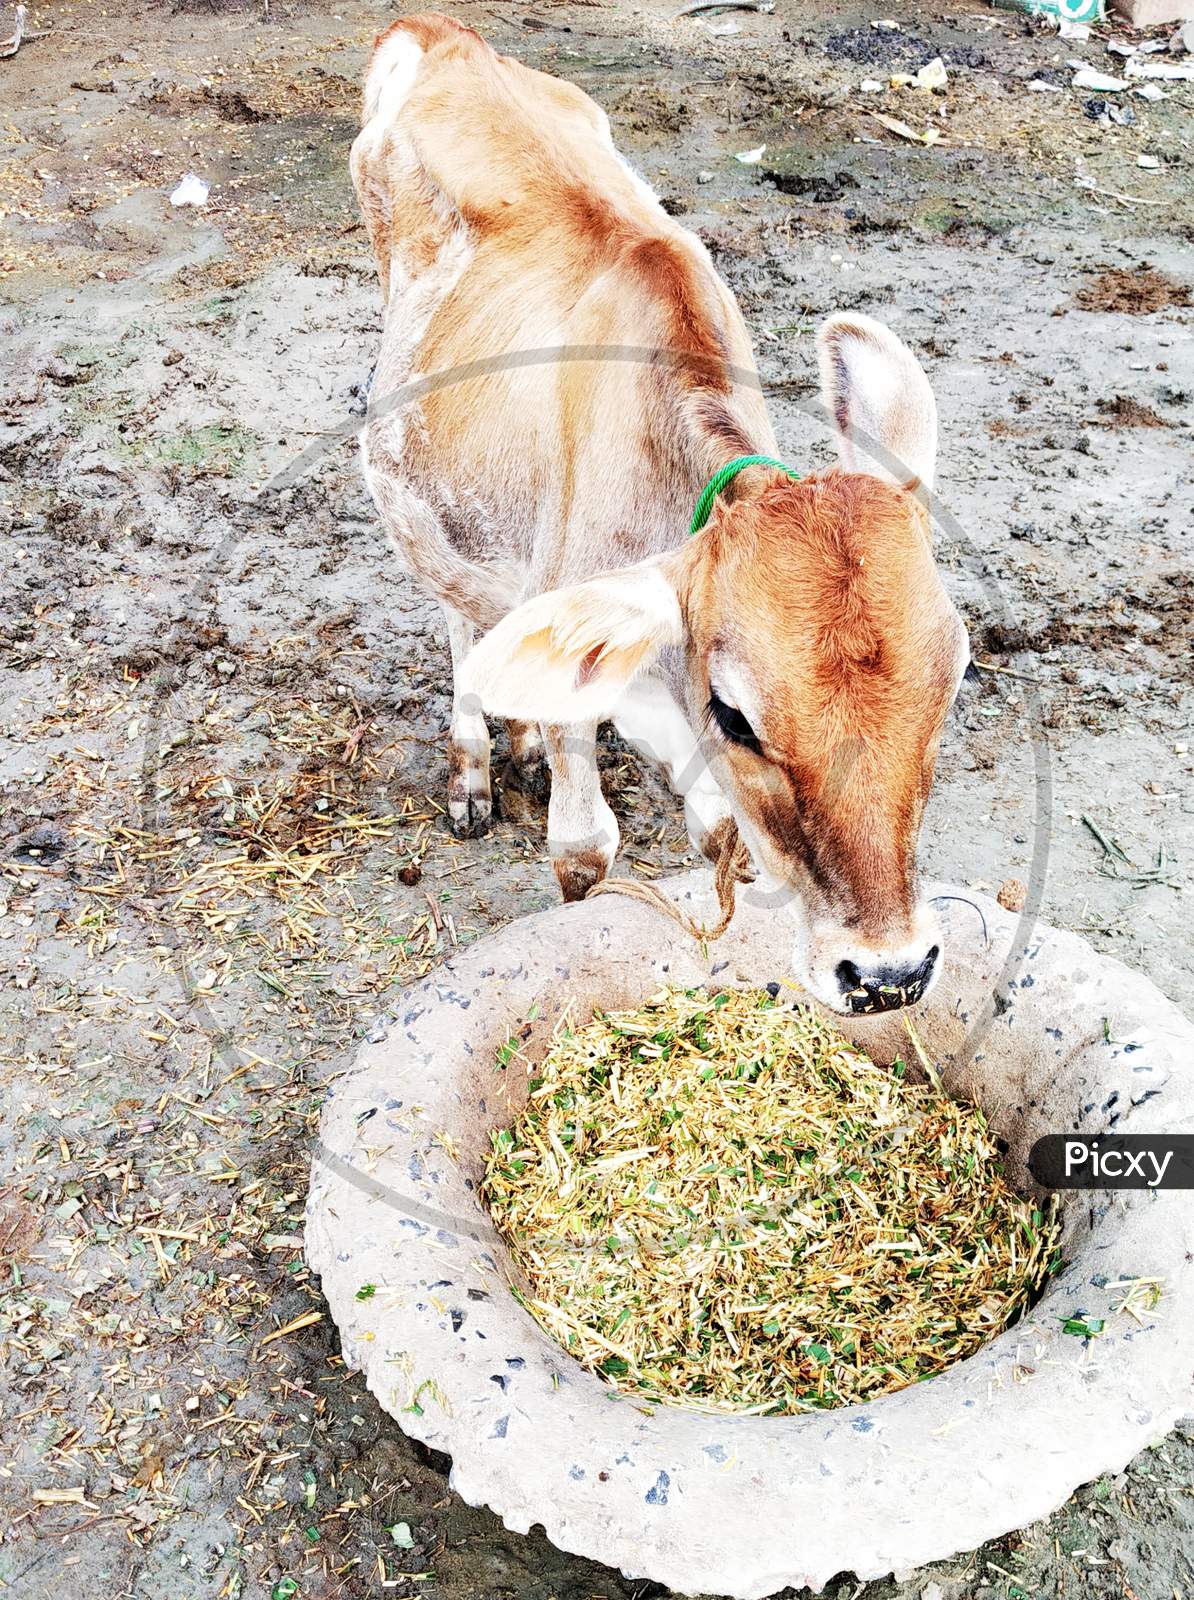 It is a child of a cow, it has an orange color, it is eating orange or it is eating grass, it is eating trees in its background and some straw in its background.